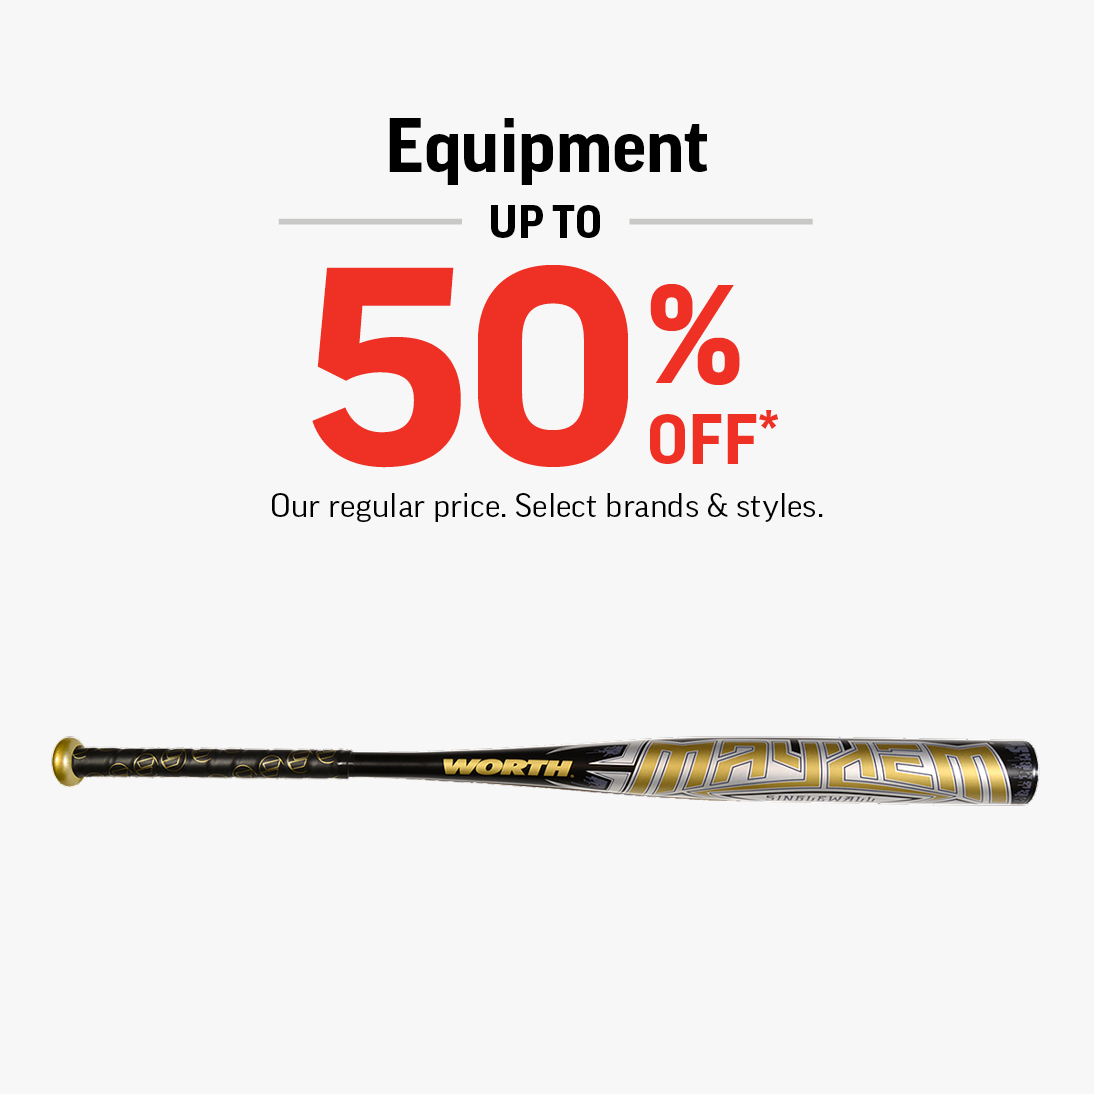 Equipment Up To 50% Off!